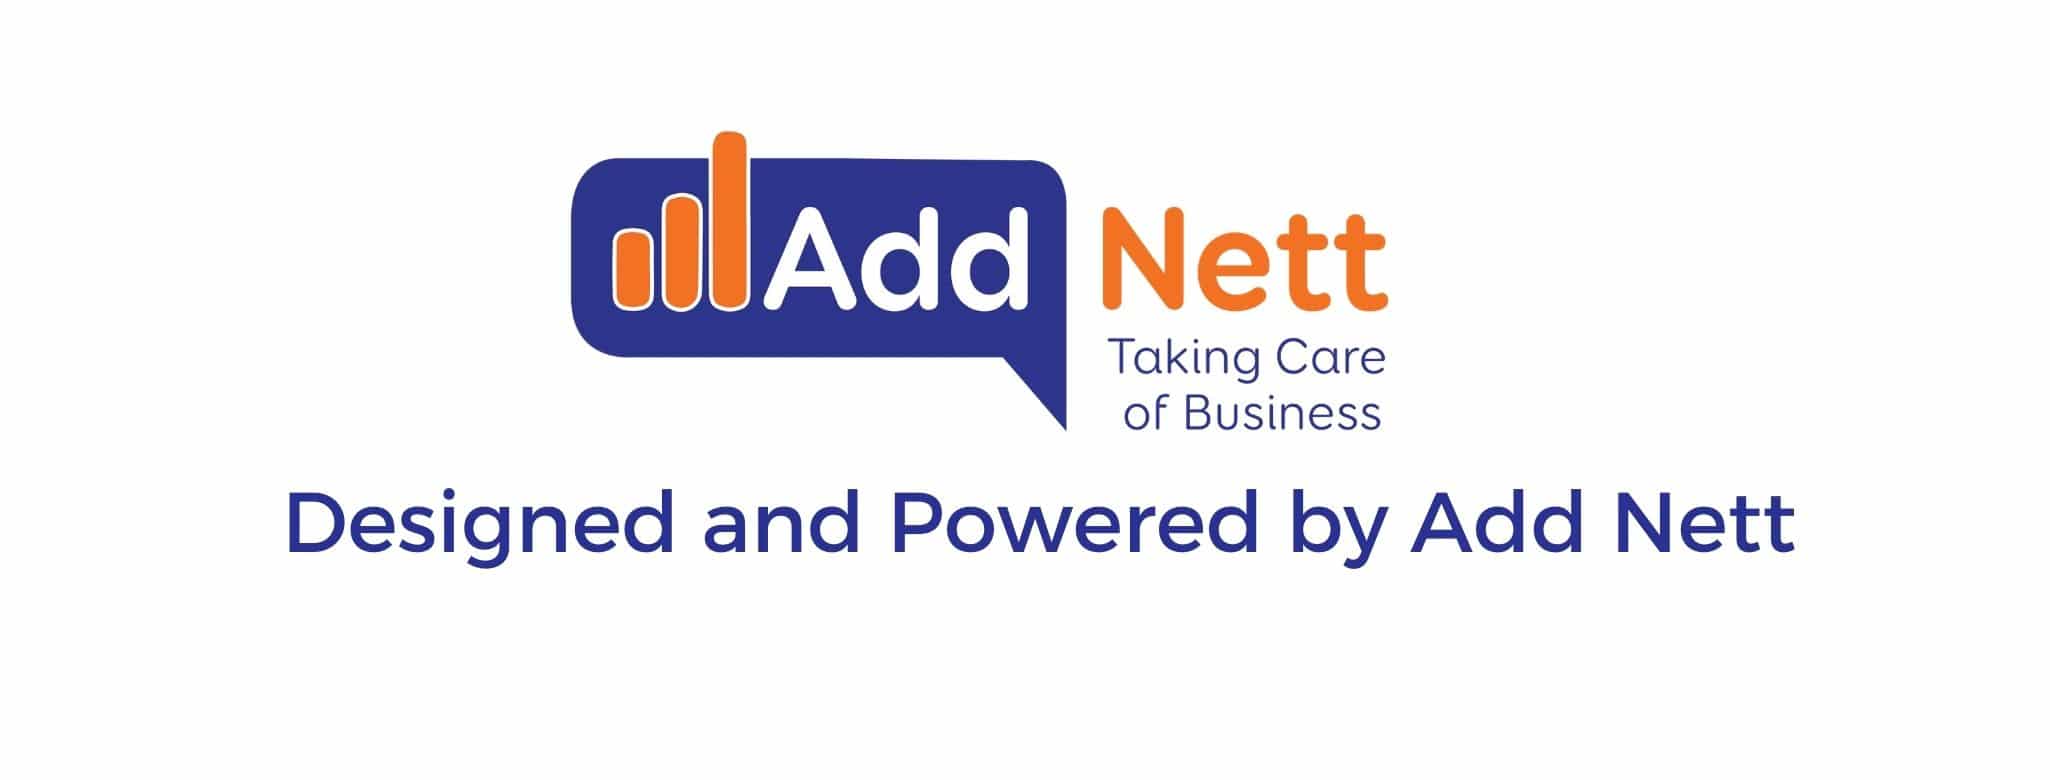 Designed and Powered by Add Nett